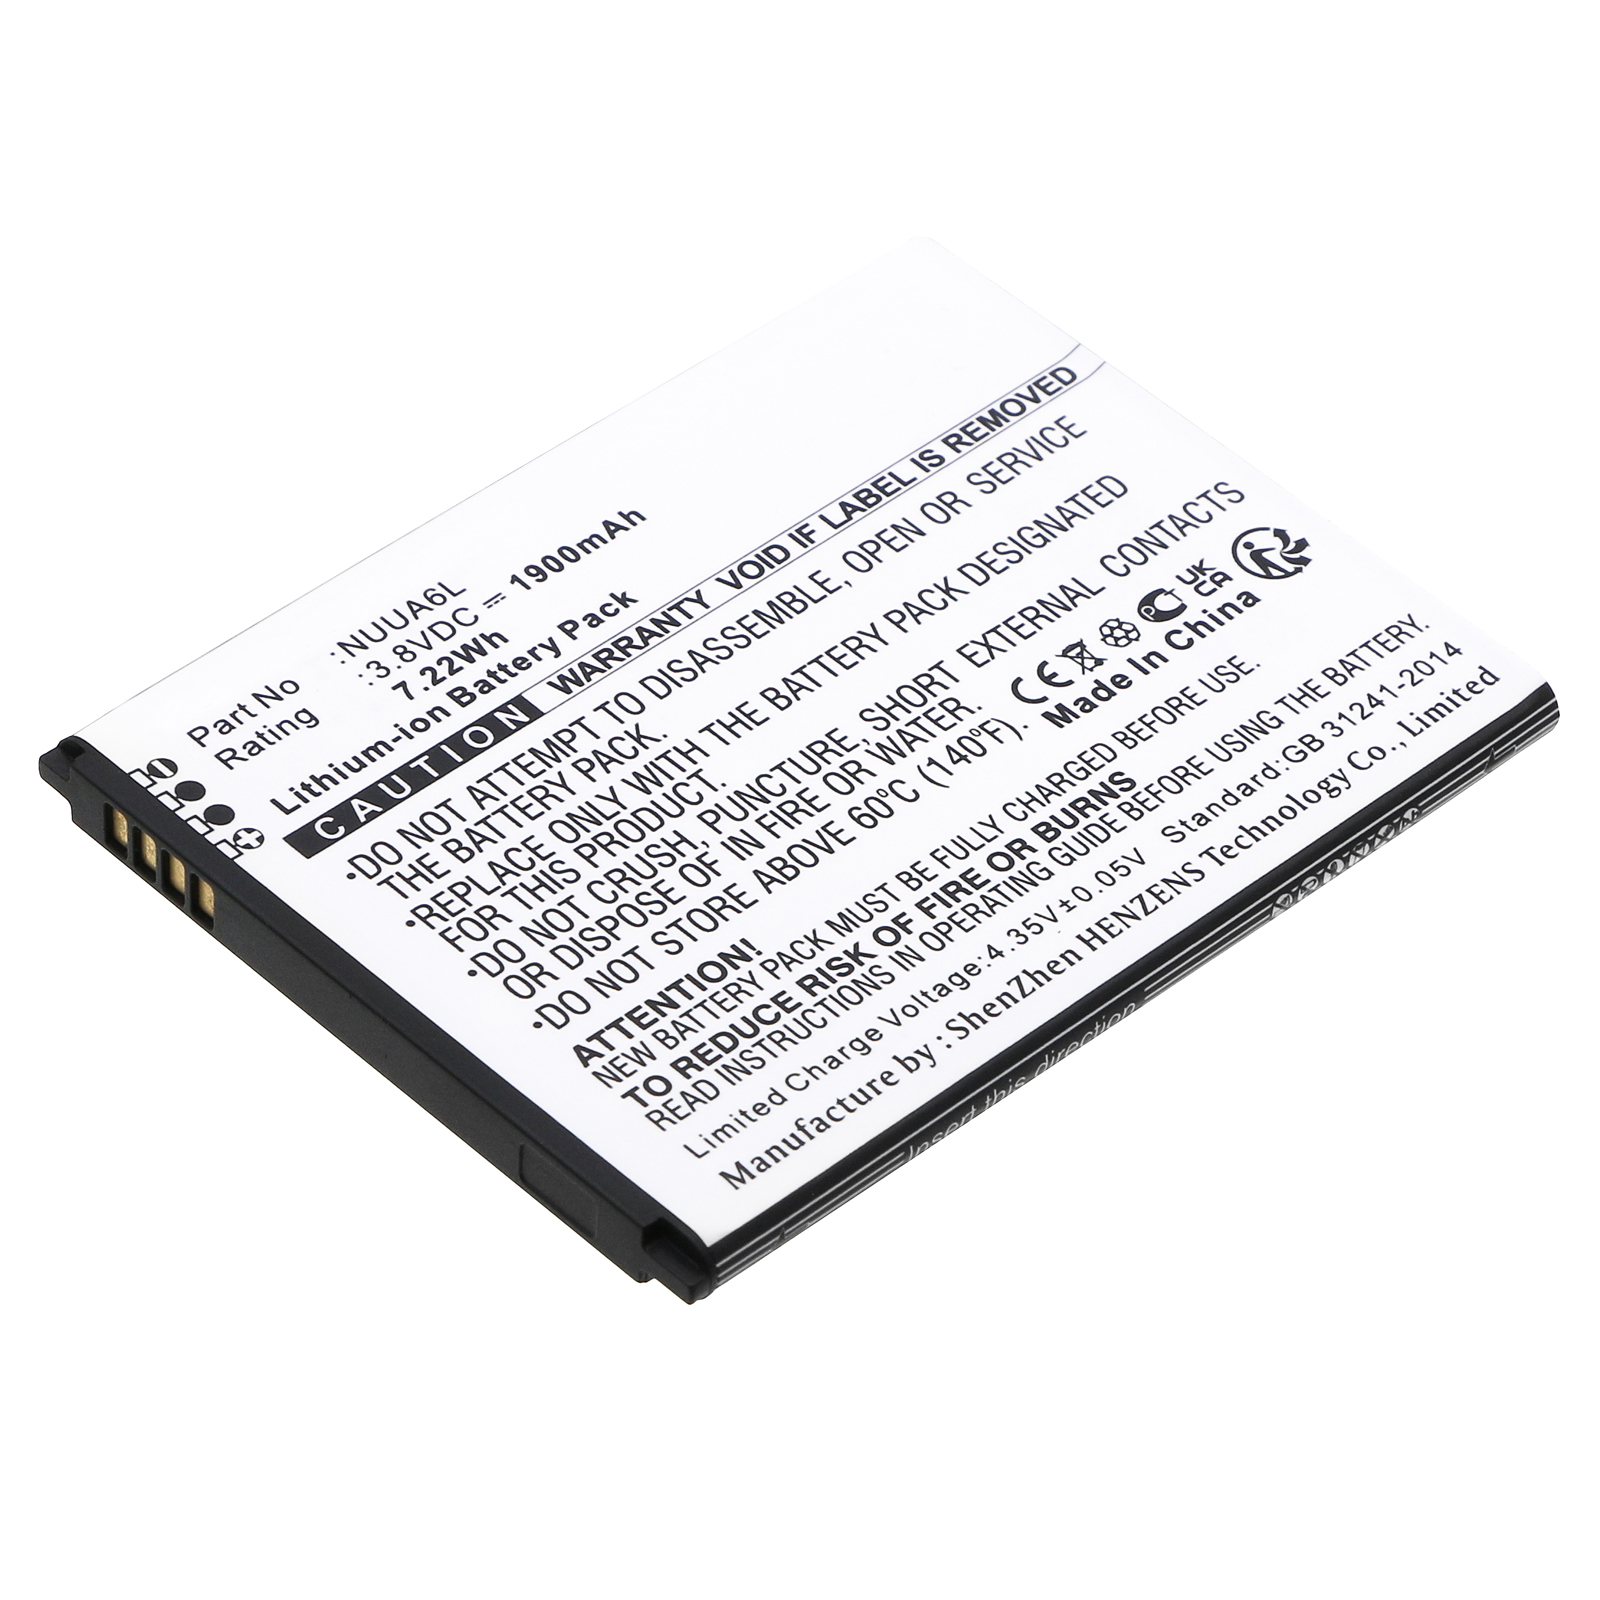 Synergy Digital Cell Phone Battery, Compatible with NUU NUUA6L Cell Phone Battery (Li-ion, 3.8V, 1900mAh)